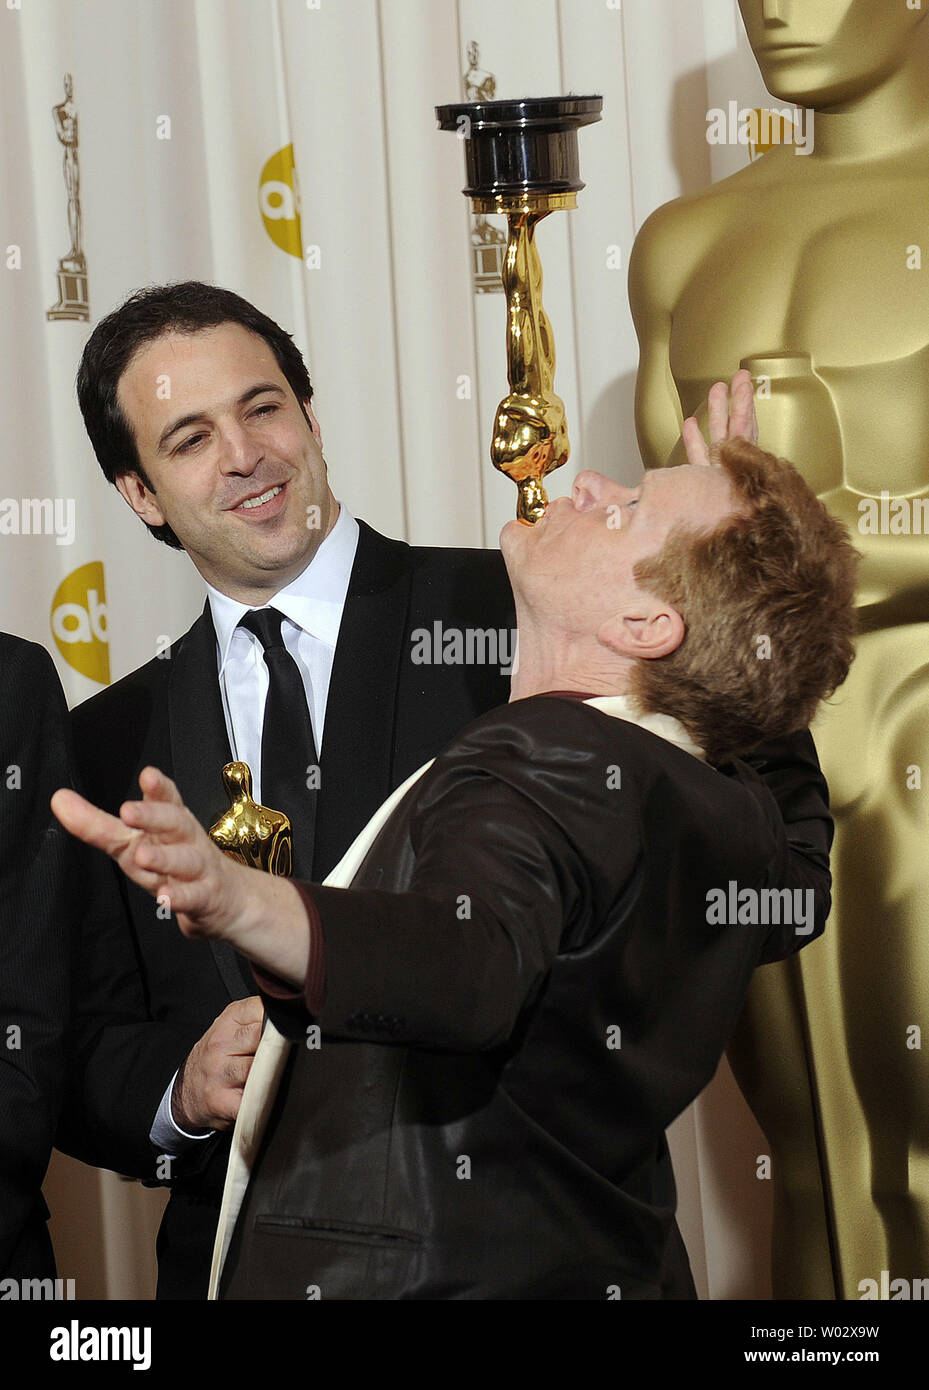 Simon Chinn watches as artist Phillippe Petit balances his Oscar for the film 'Man on Wire' on his chin backstage at the 81st Academy Awards in Hollywood on February 22, 2009.   UPI/Phil McCarten Stock Photo